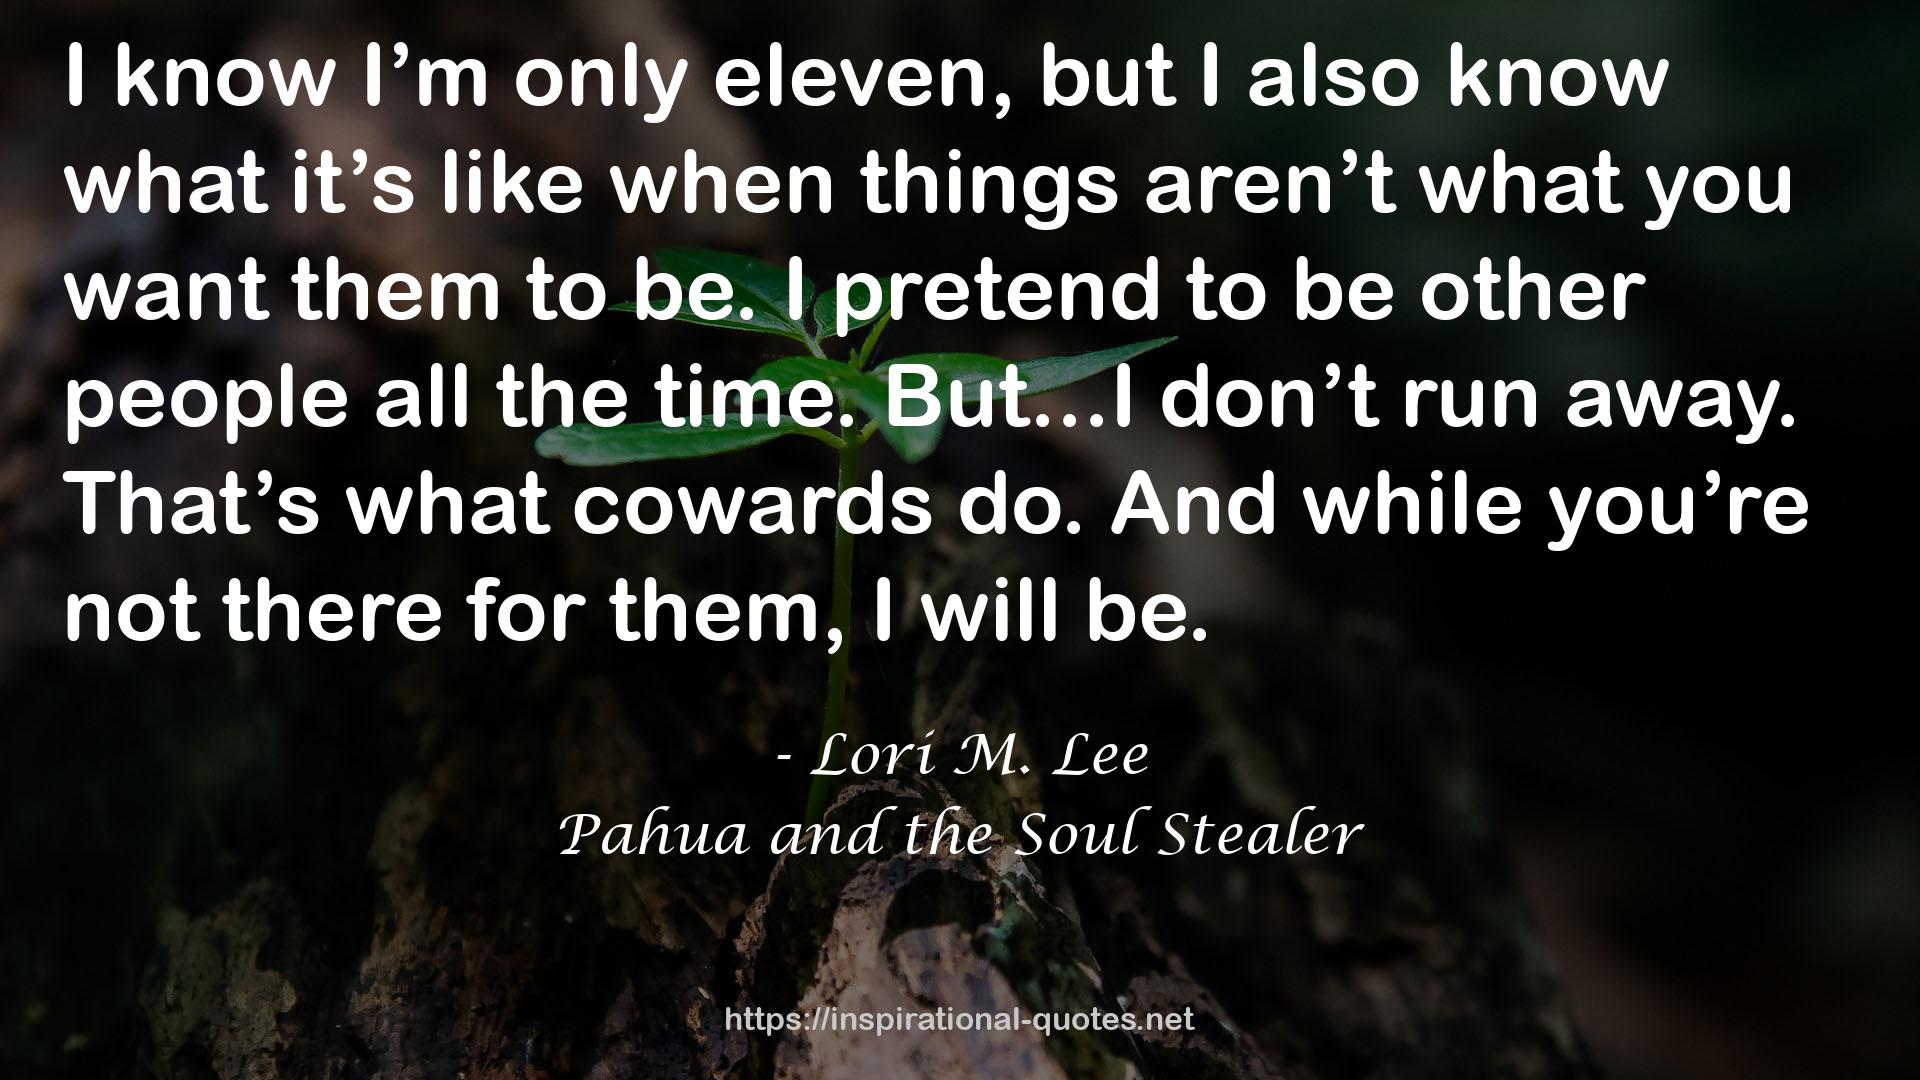 Pahua and the Soul Stealer QUOTES